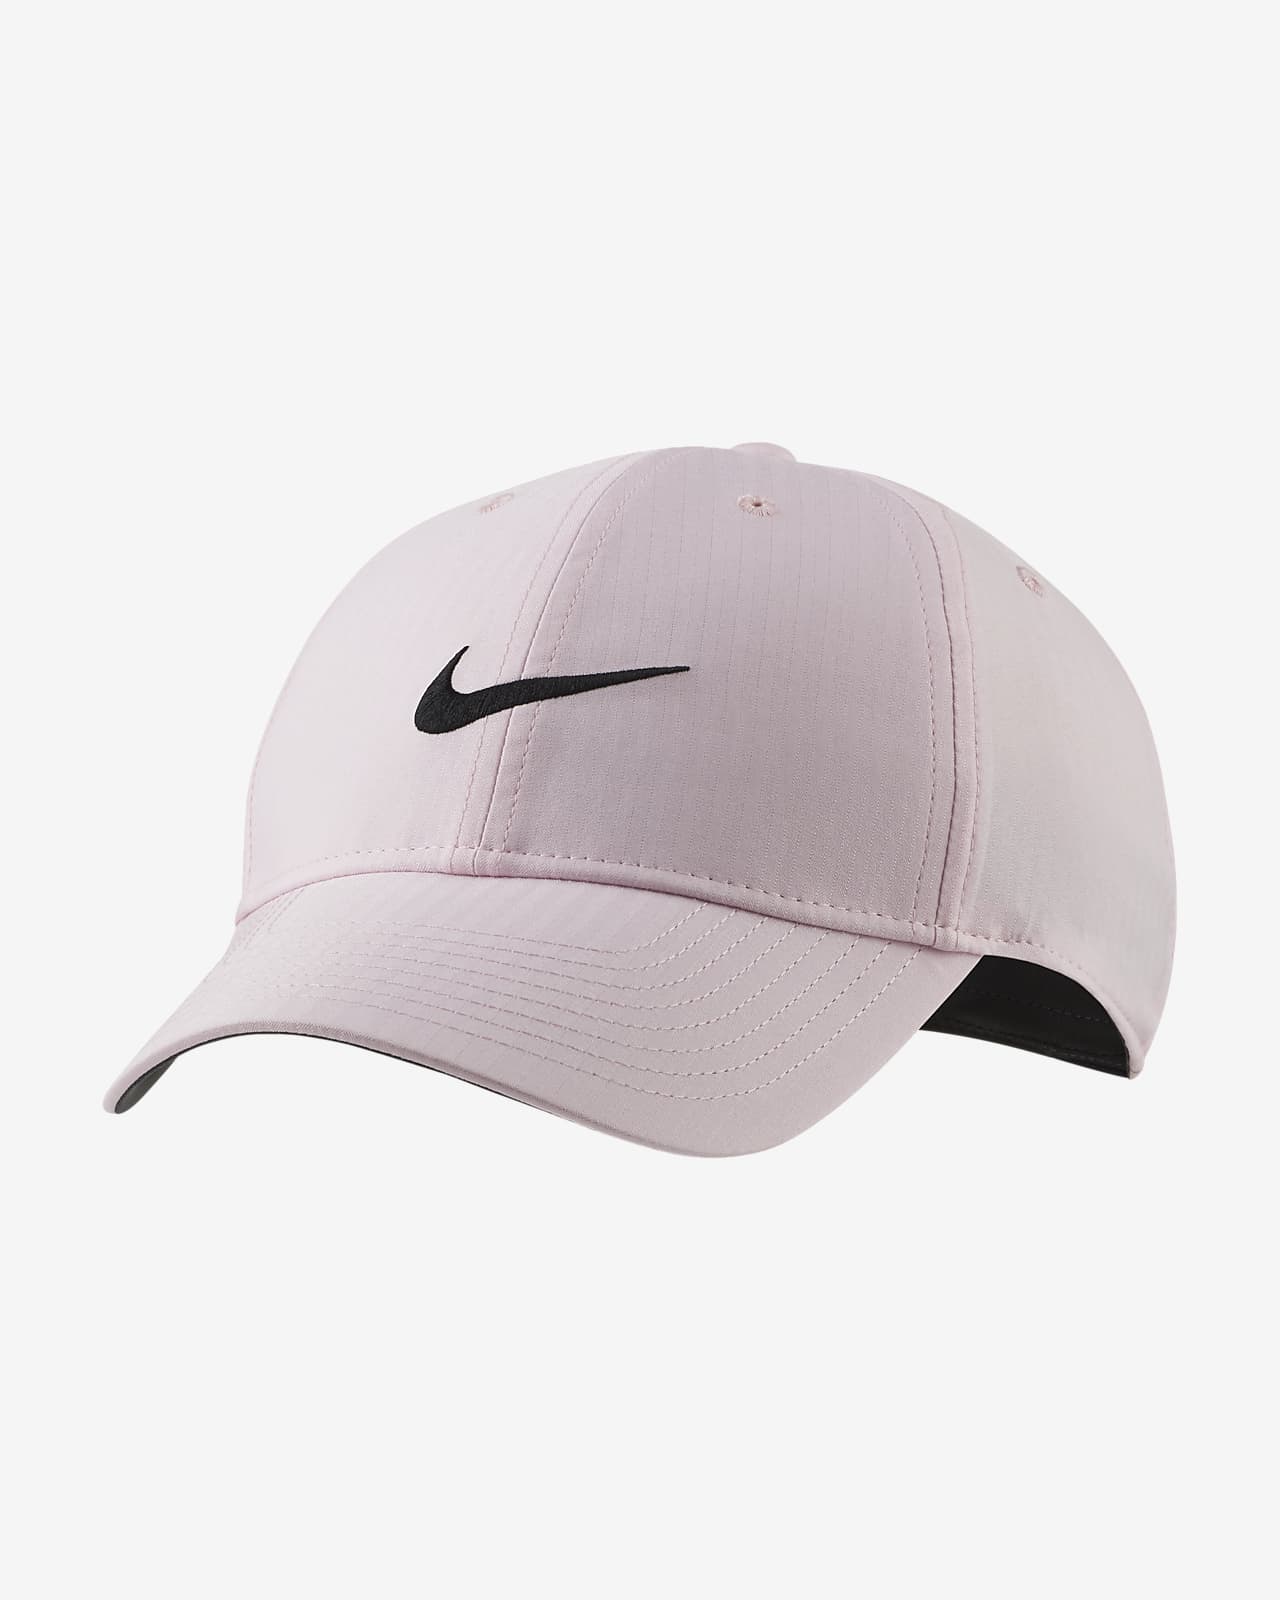 nike men's legacy 91 perforated golf hat